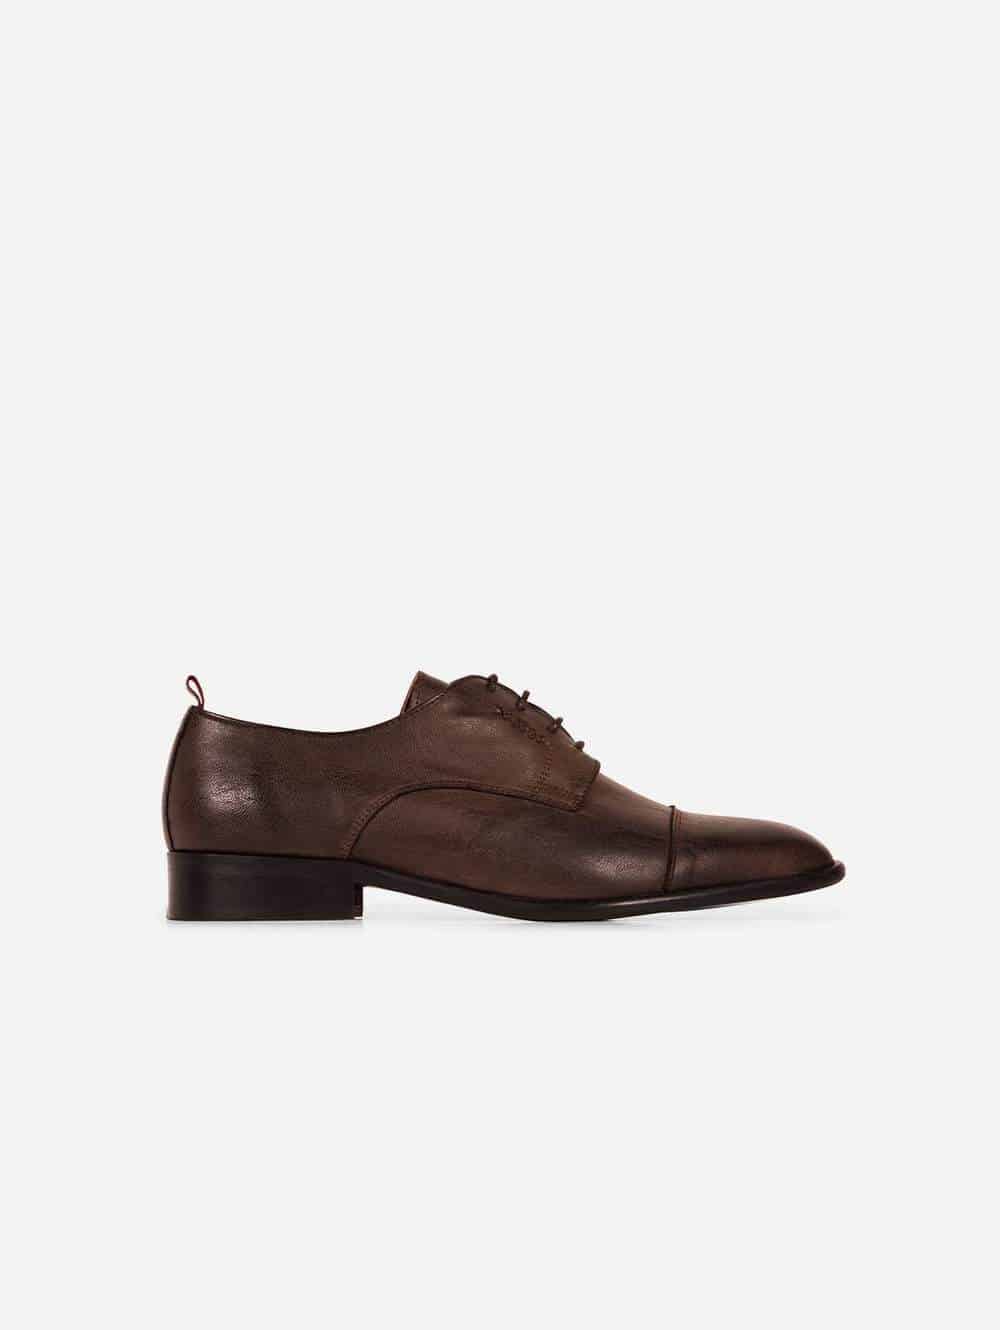 Brown lace up dress shoes from Gentleberg, maker of mens shoes vegan